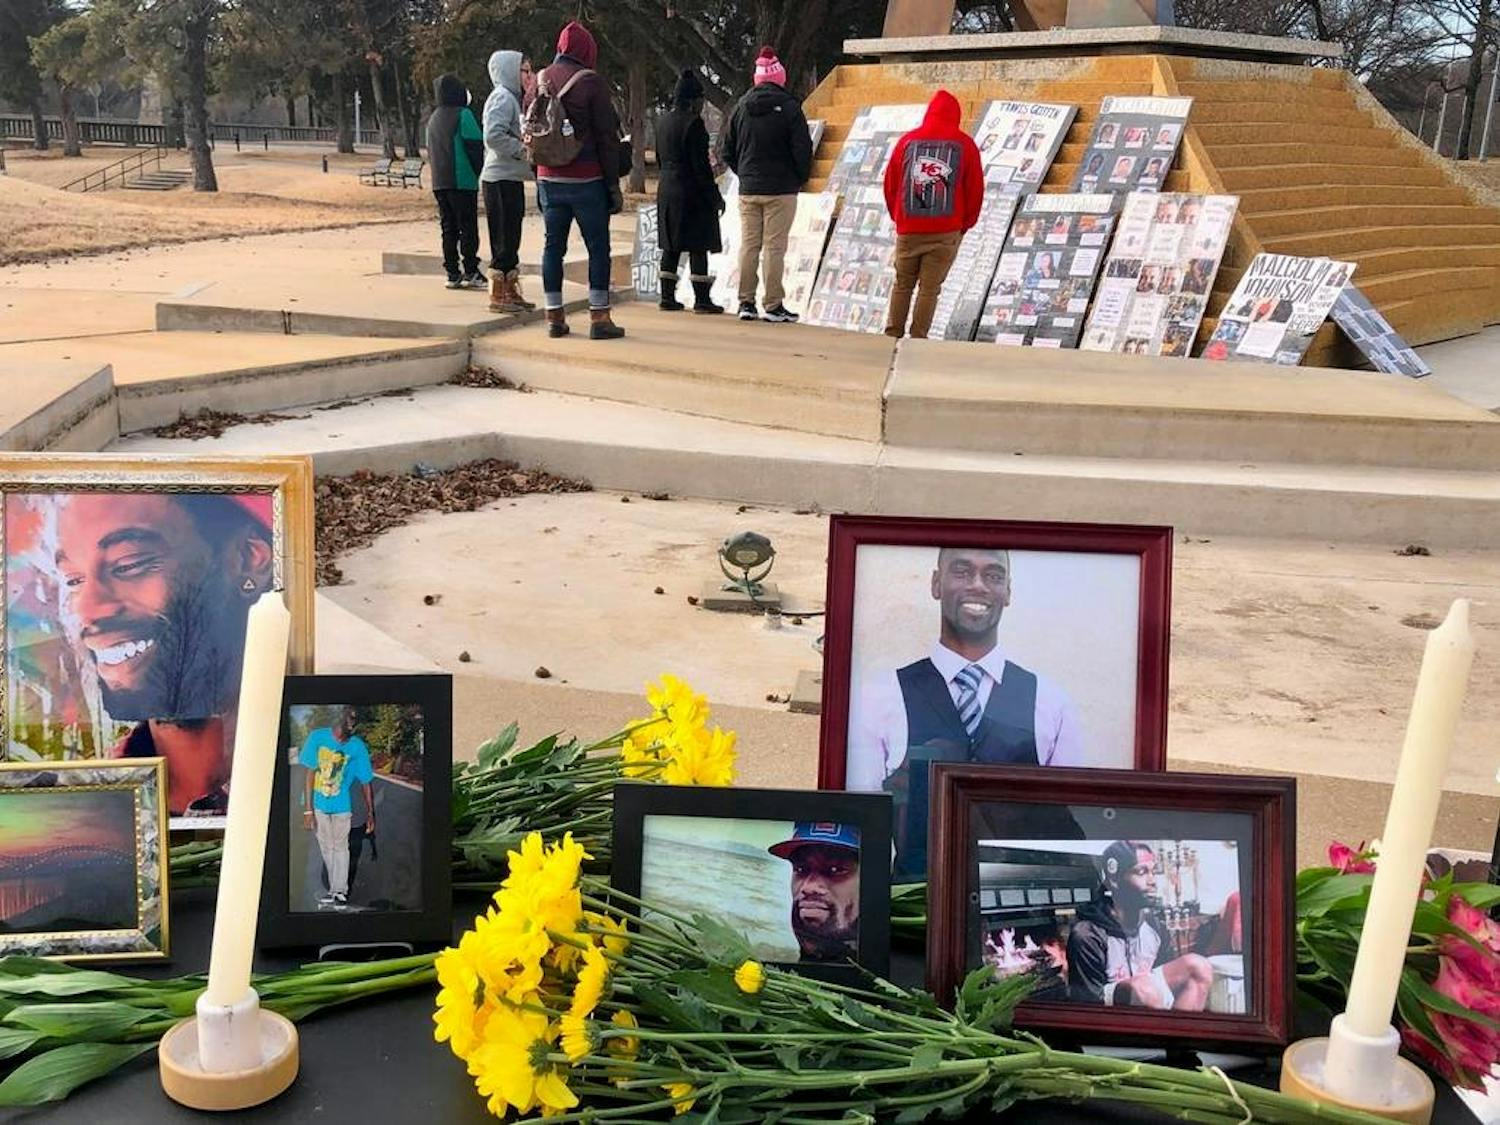 A vigil for Tyre Nichols, a man killed by Memphis police earlier this month, was held Sunday at the Spirit of Freedom Fountain on Emanuel Cleaver II Boulevard in Kansas City.
Photo Courtesy of Anna Spoerre/The Kansas City.